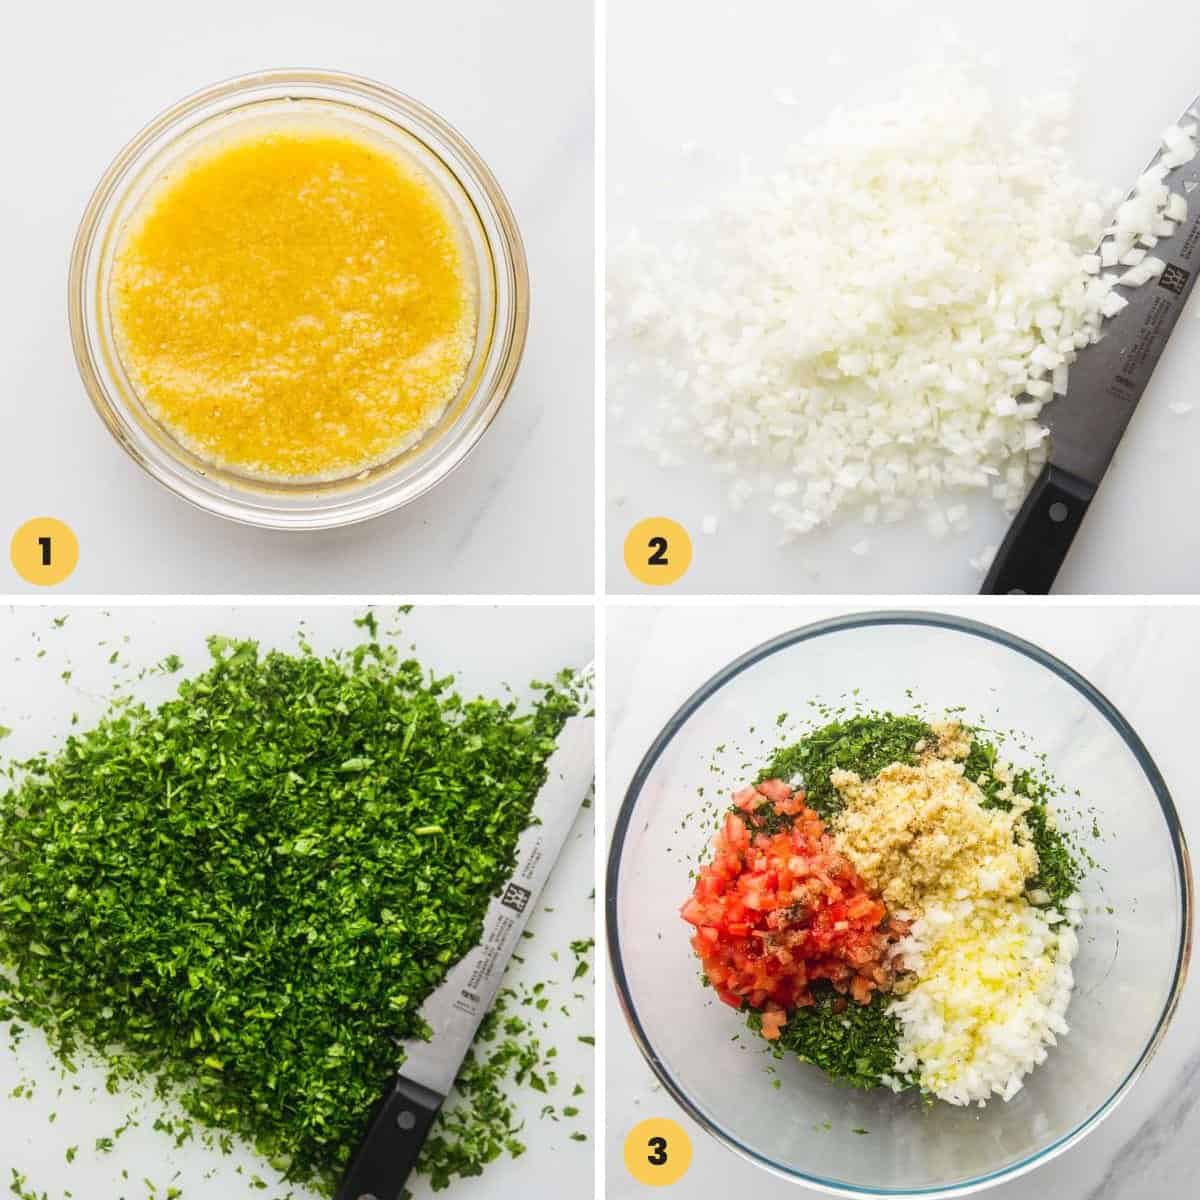 a collage of four numbered images showing how simple it is to make traditional tabbouli salad